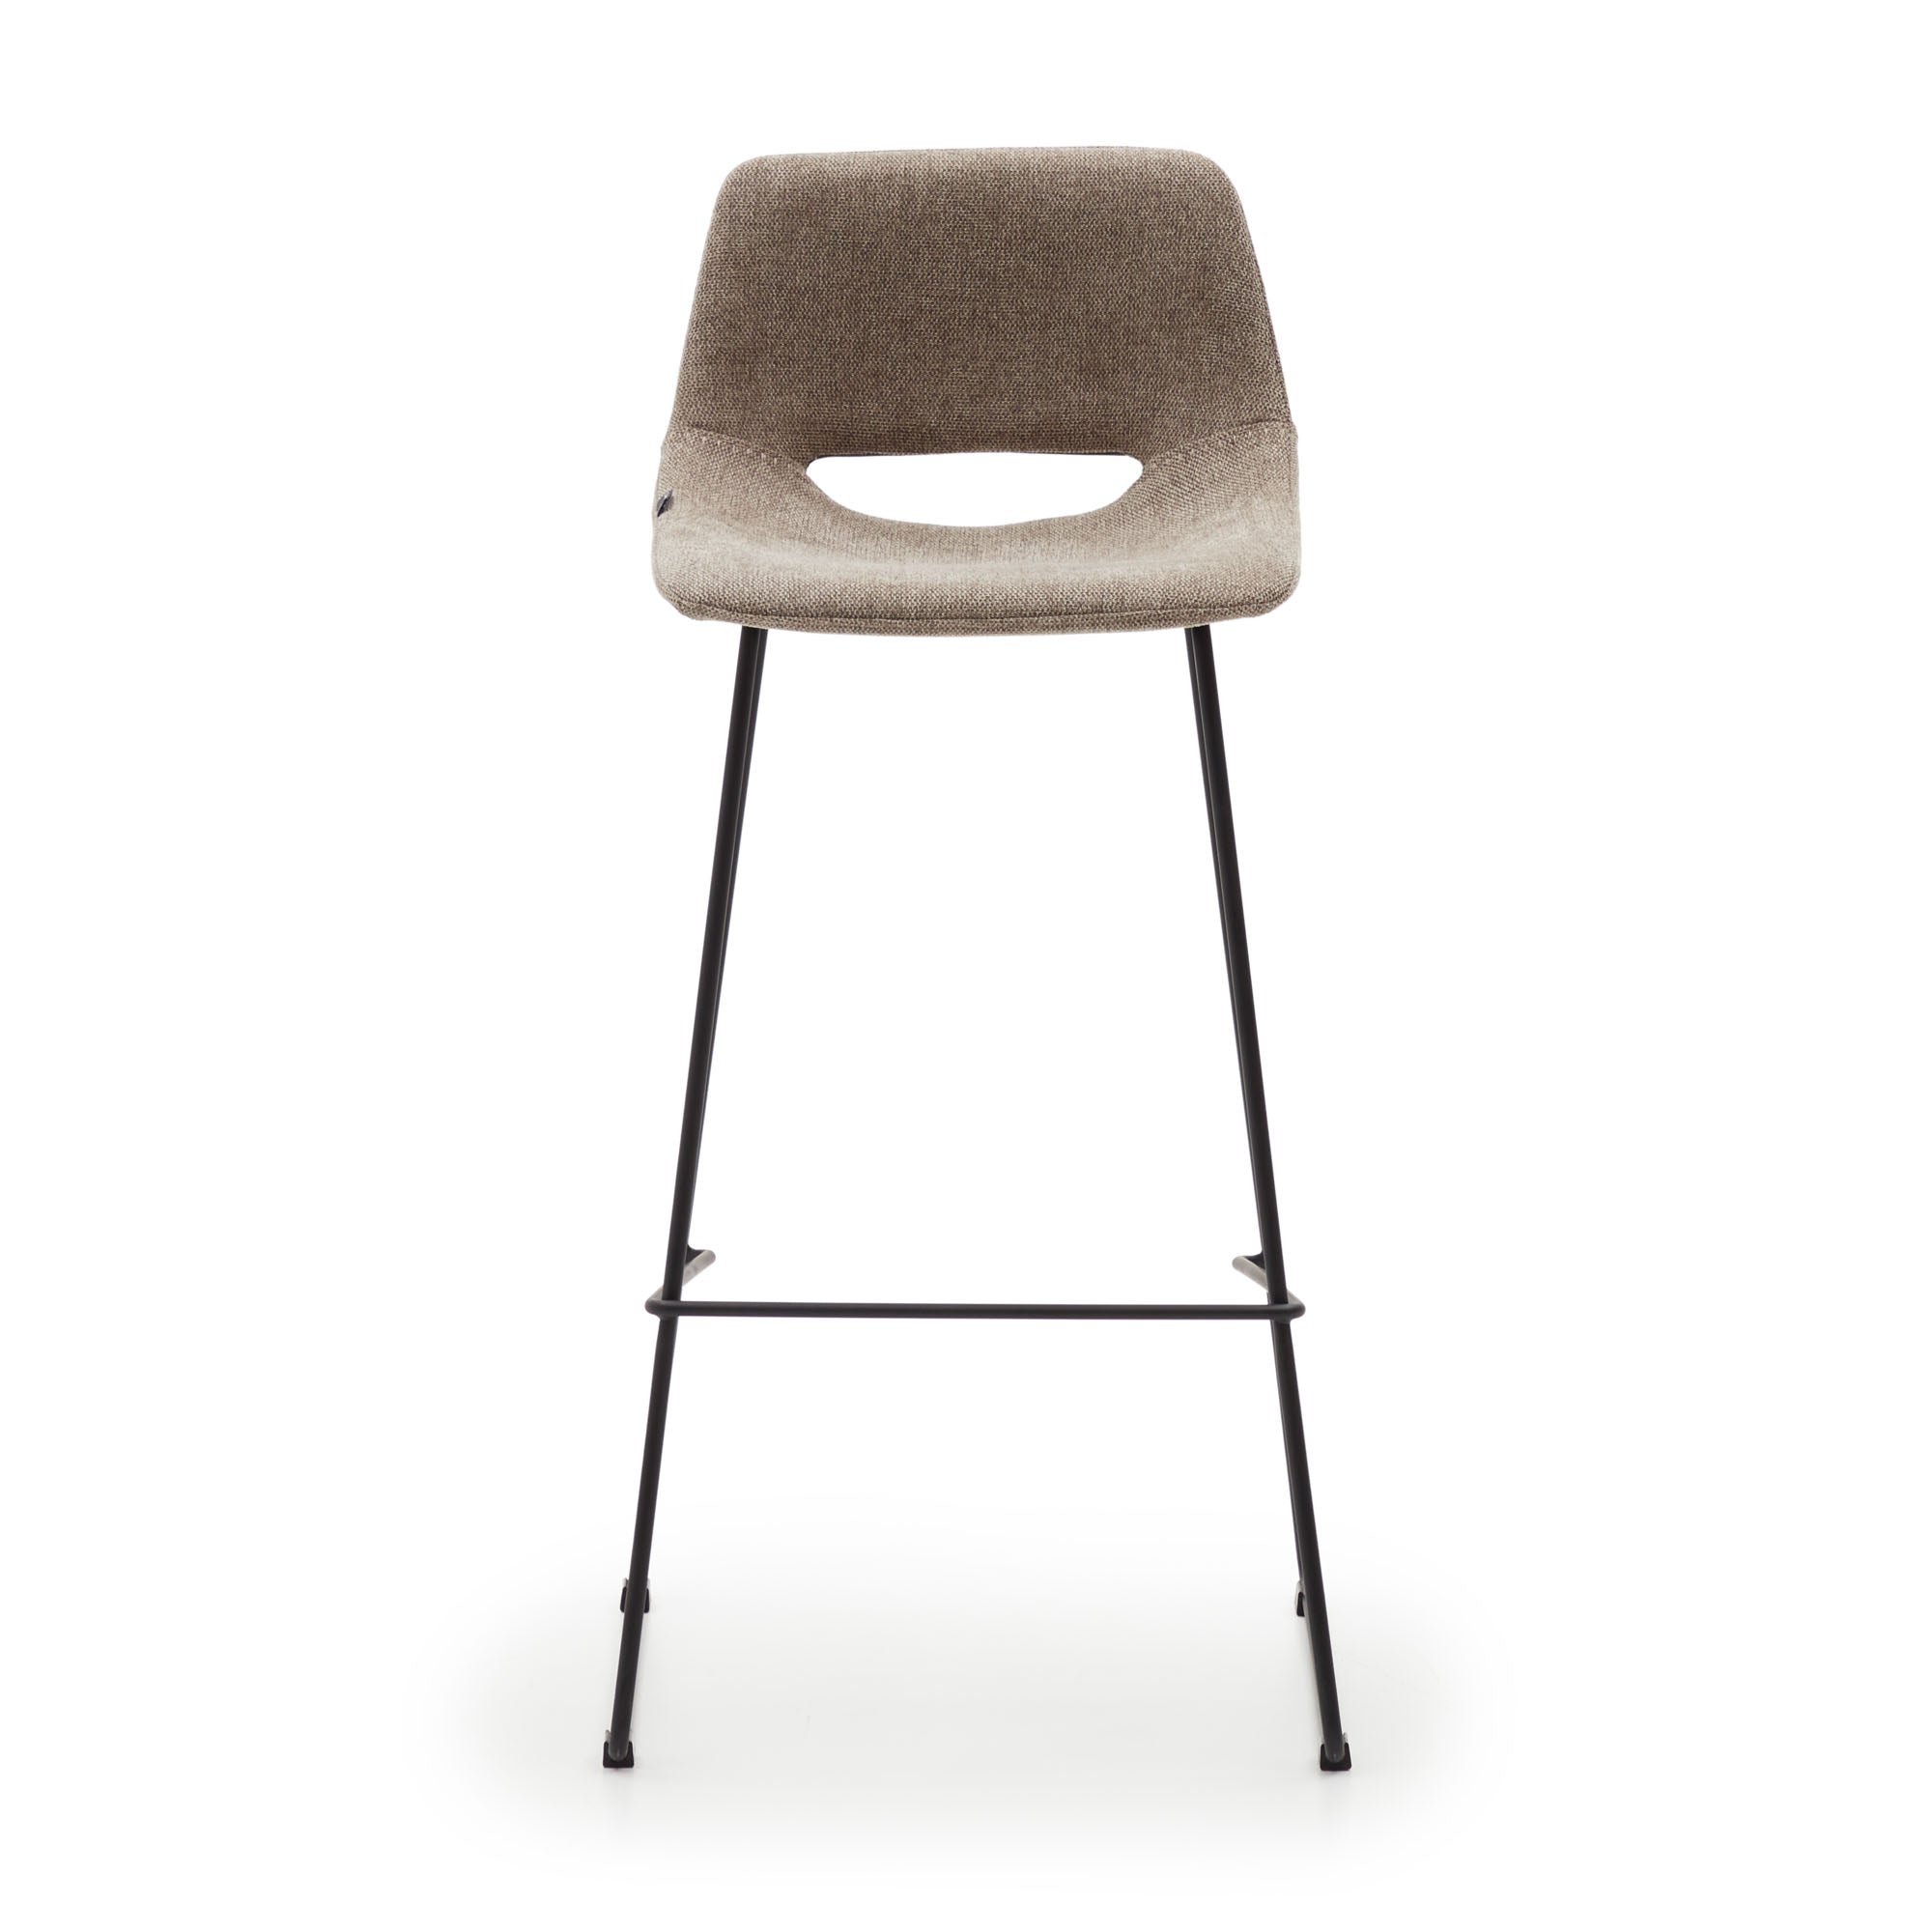 Zahara bar stool in brown with steel legs in black finish, height 76 cm